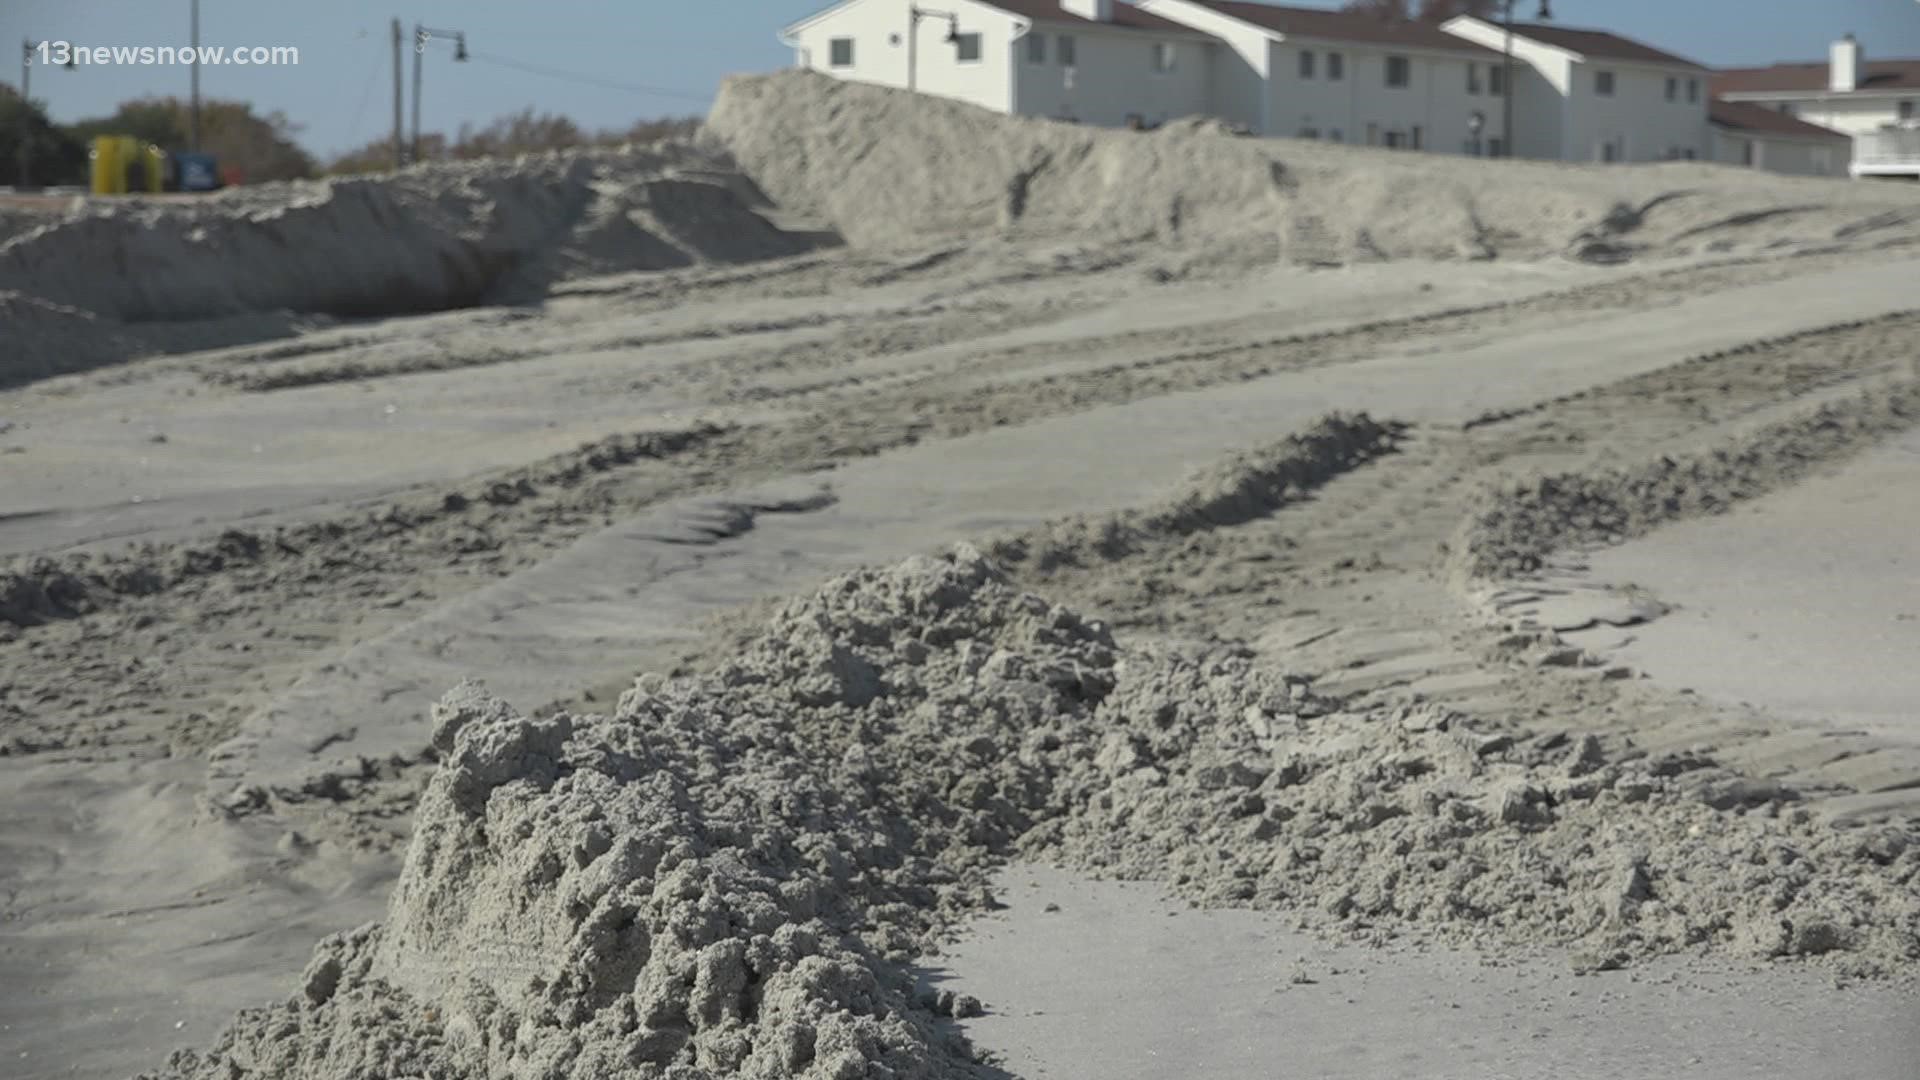 A busy area in Hampton is getting a much-needed facelift. A large-scale sand replenishment project is happening at Buckroe Beach.